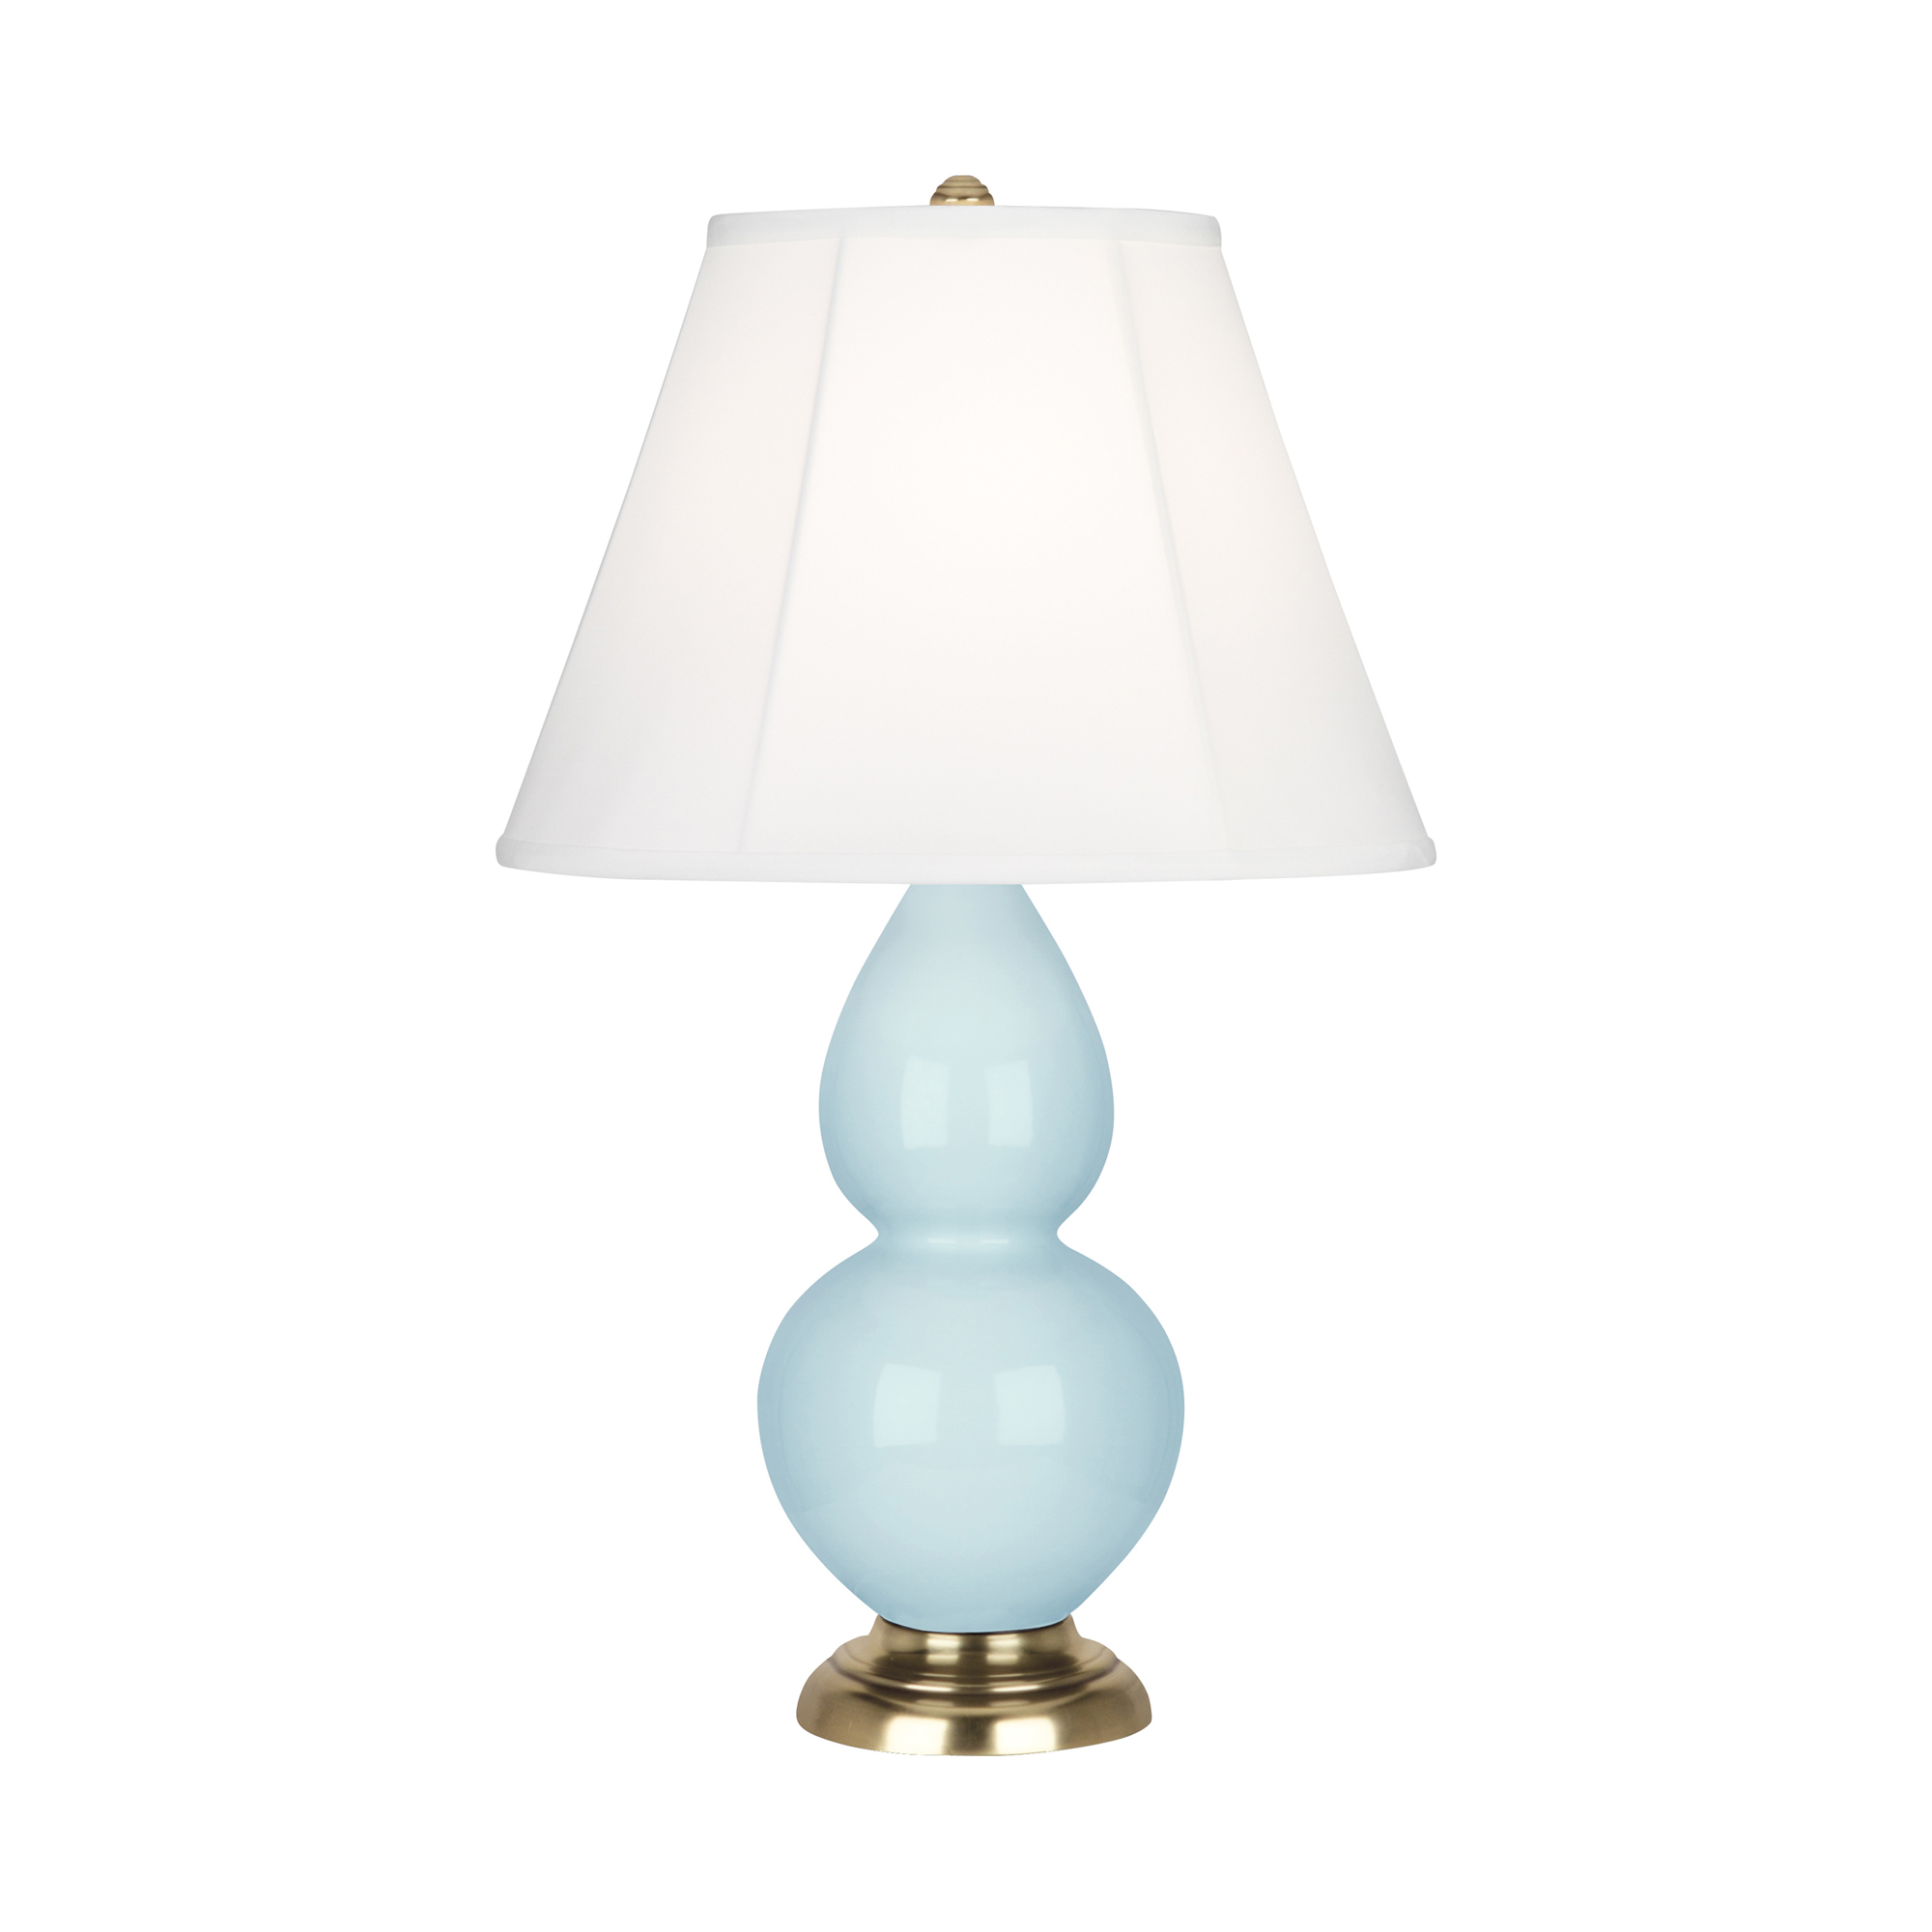 Small Double Gourd Accent Lamp Style #1689